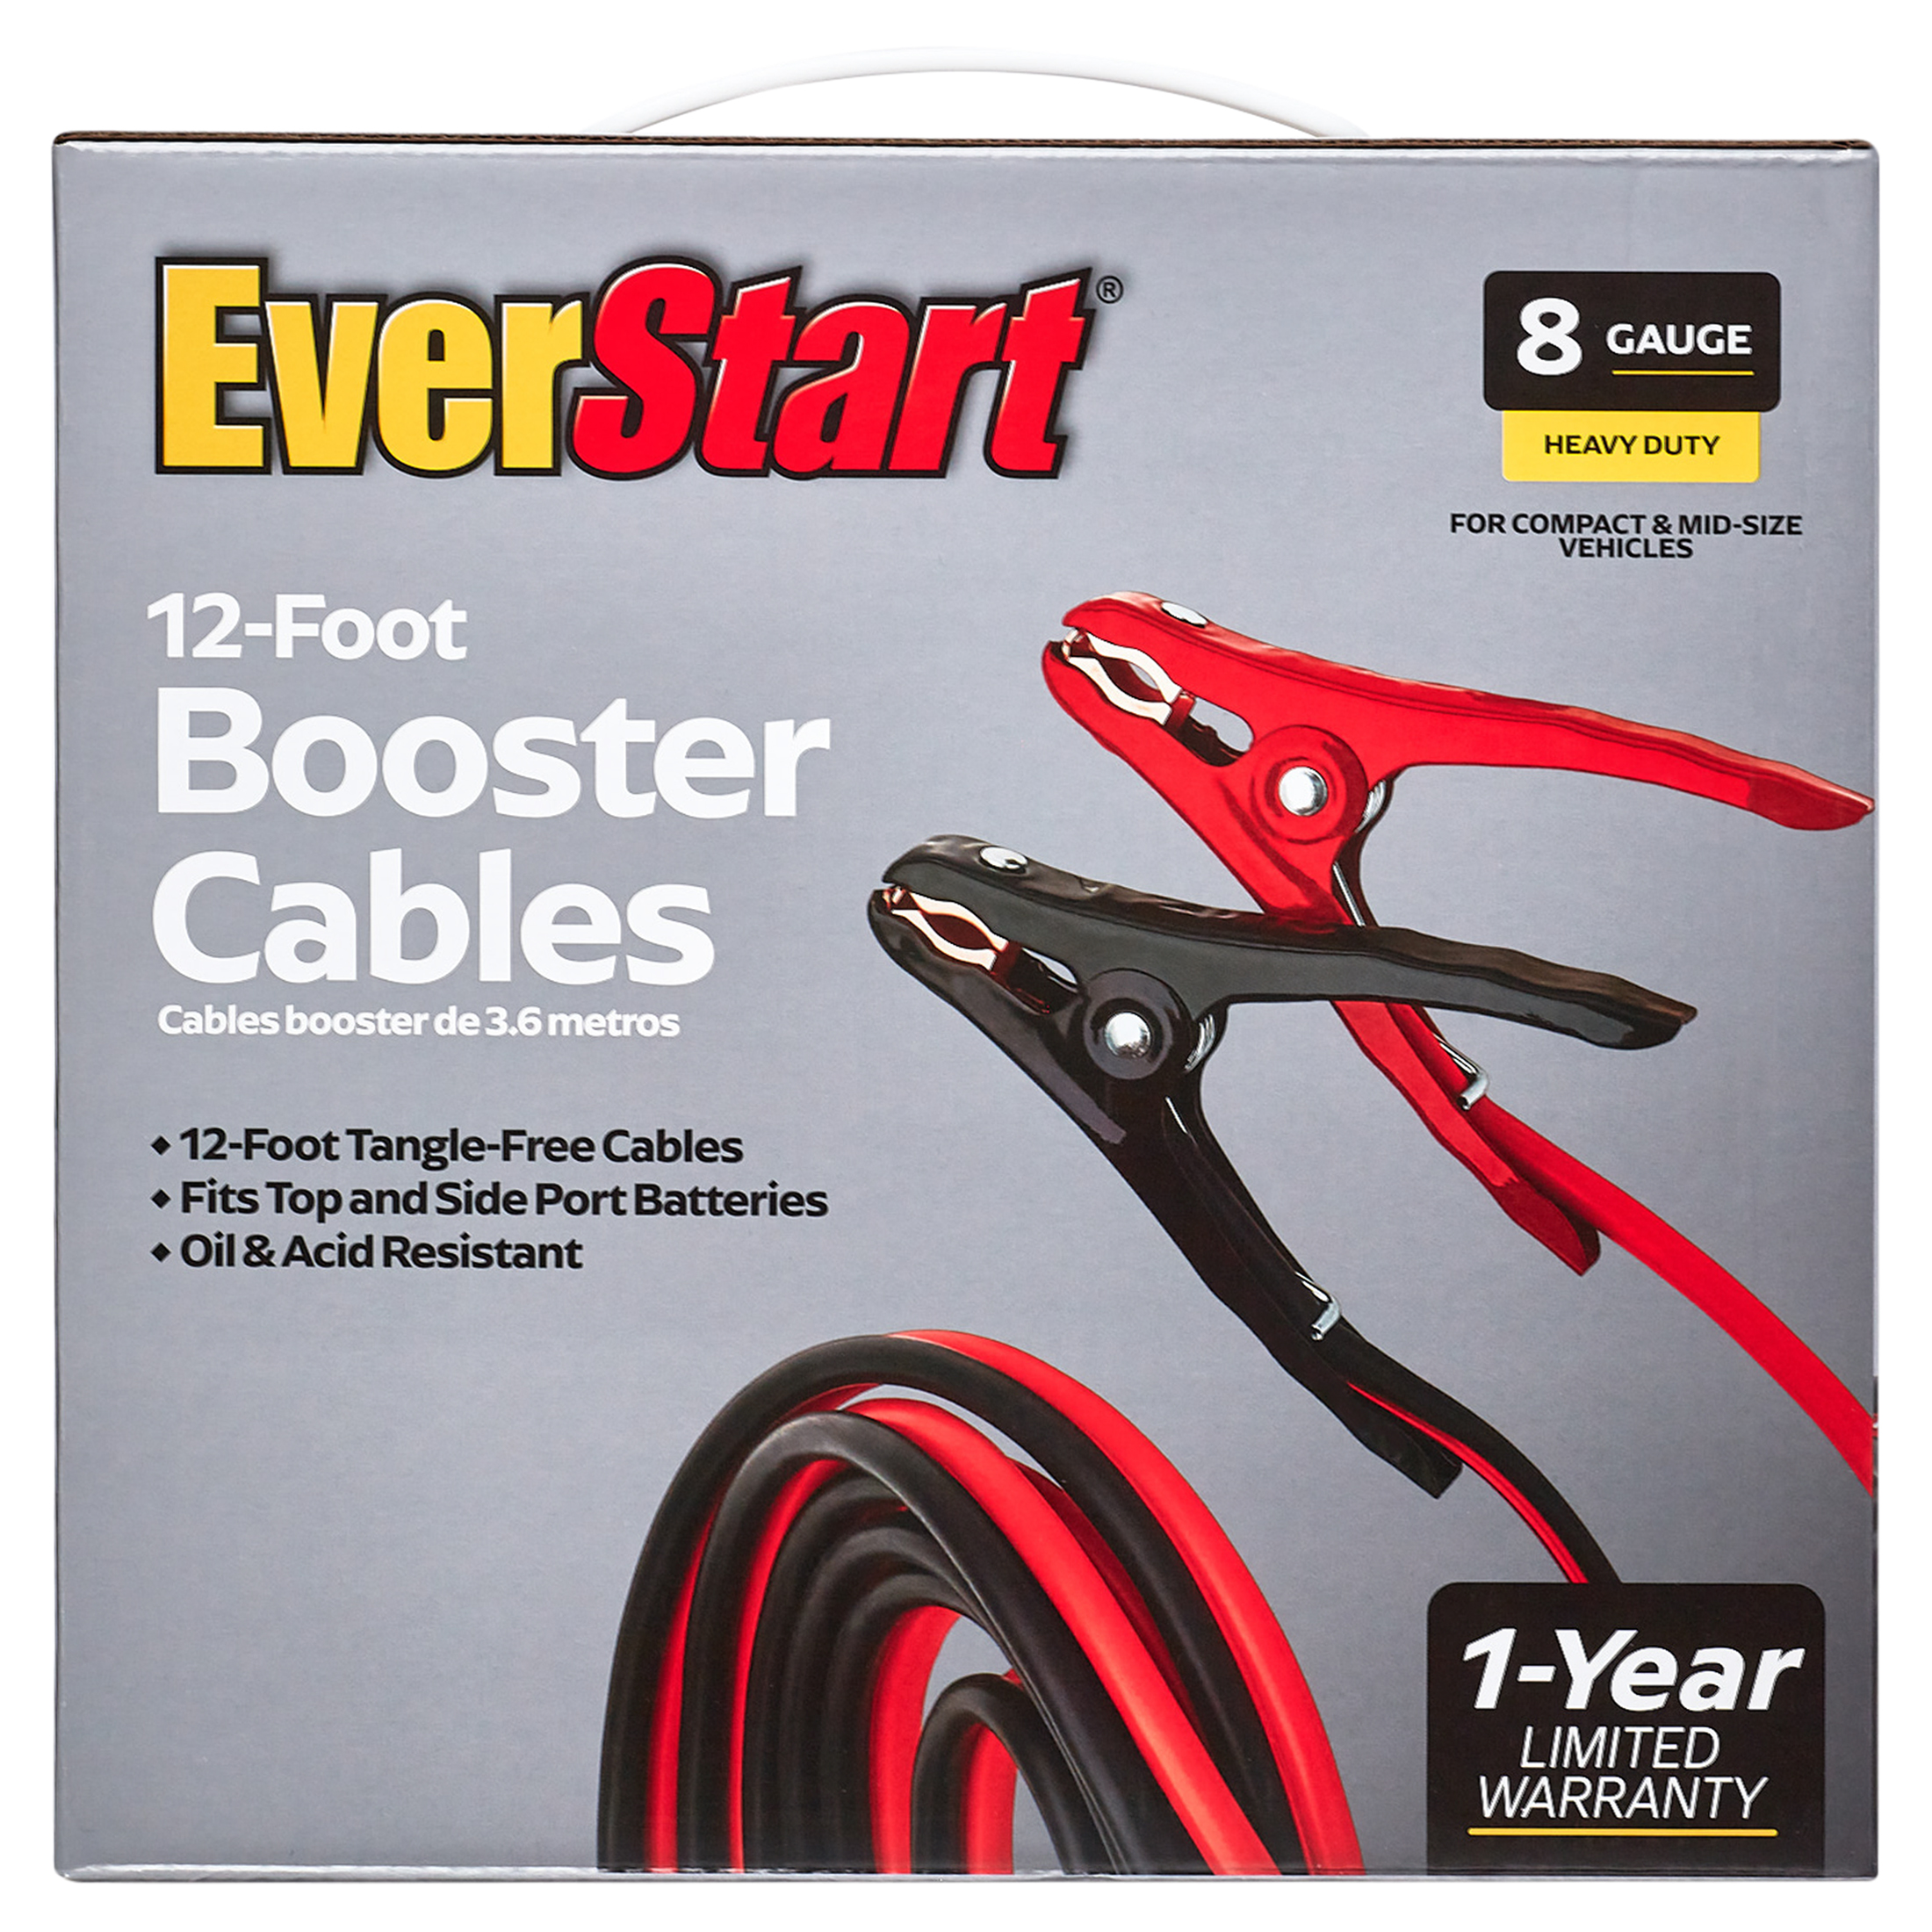 EverStart 8-Gauge Heavy Duty 12-Foot Booster Cables, 165 Amps - image 1 of 10